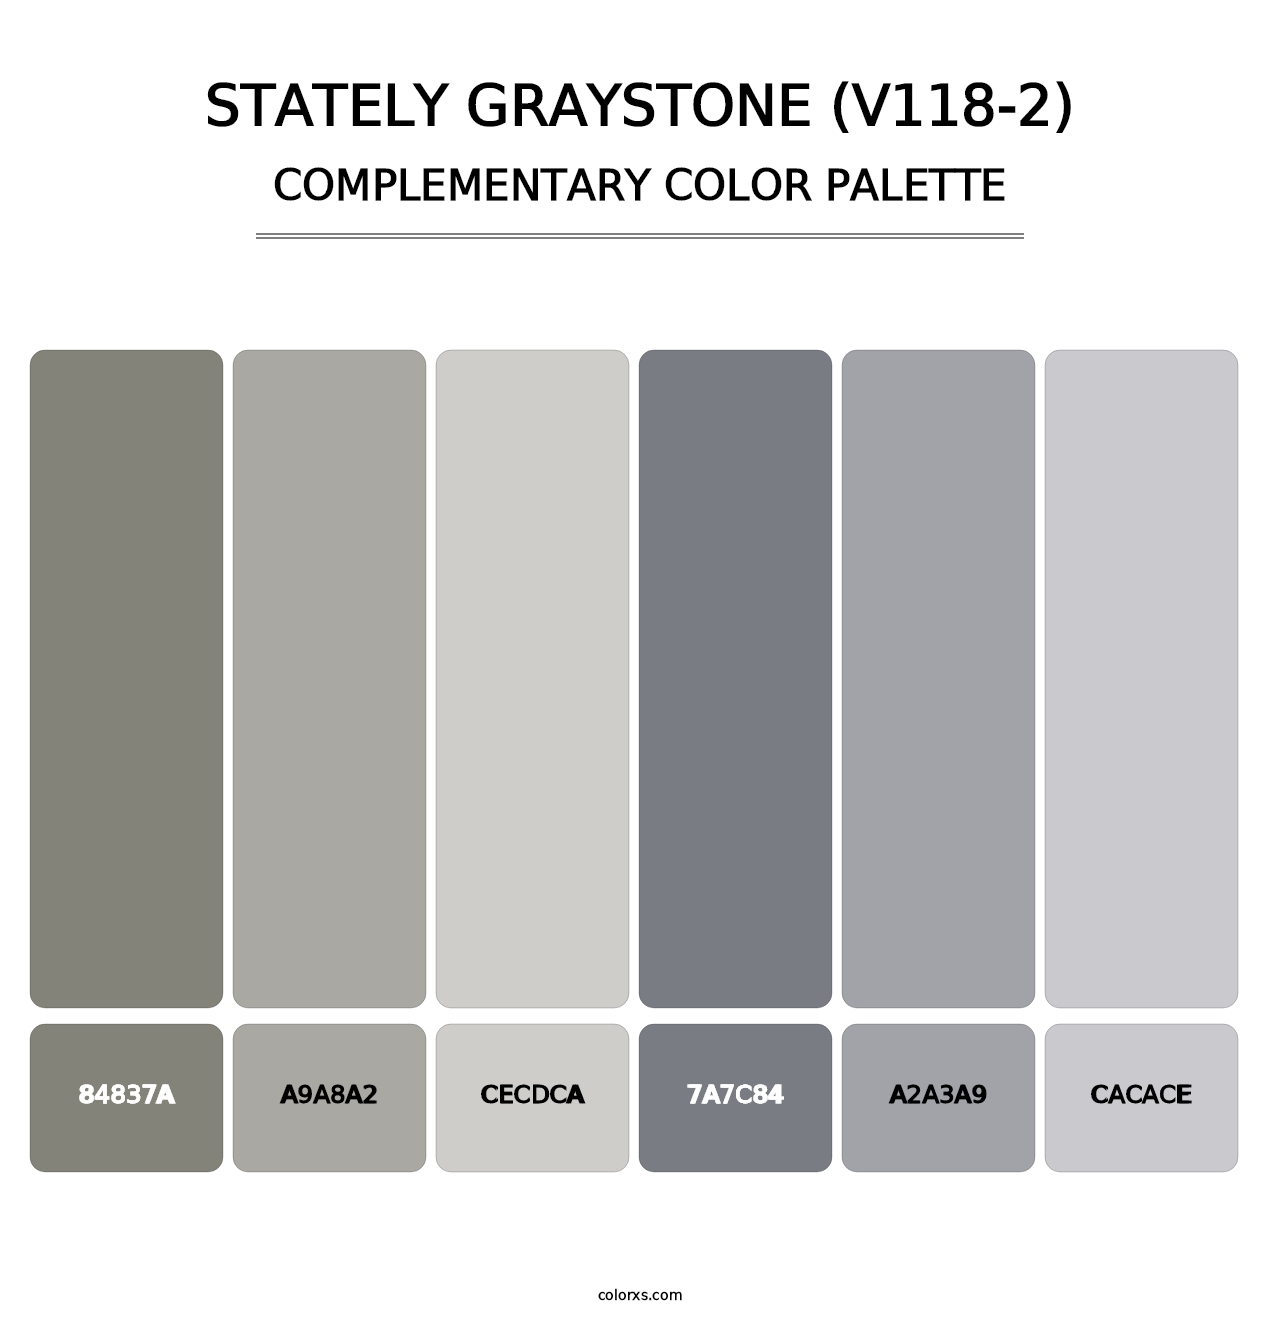 Stately Graystone (V118-2) - Complementary Color Palette